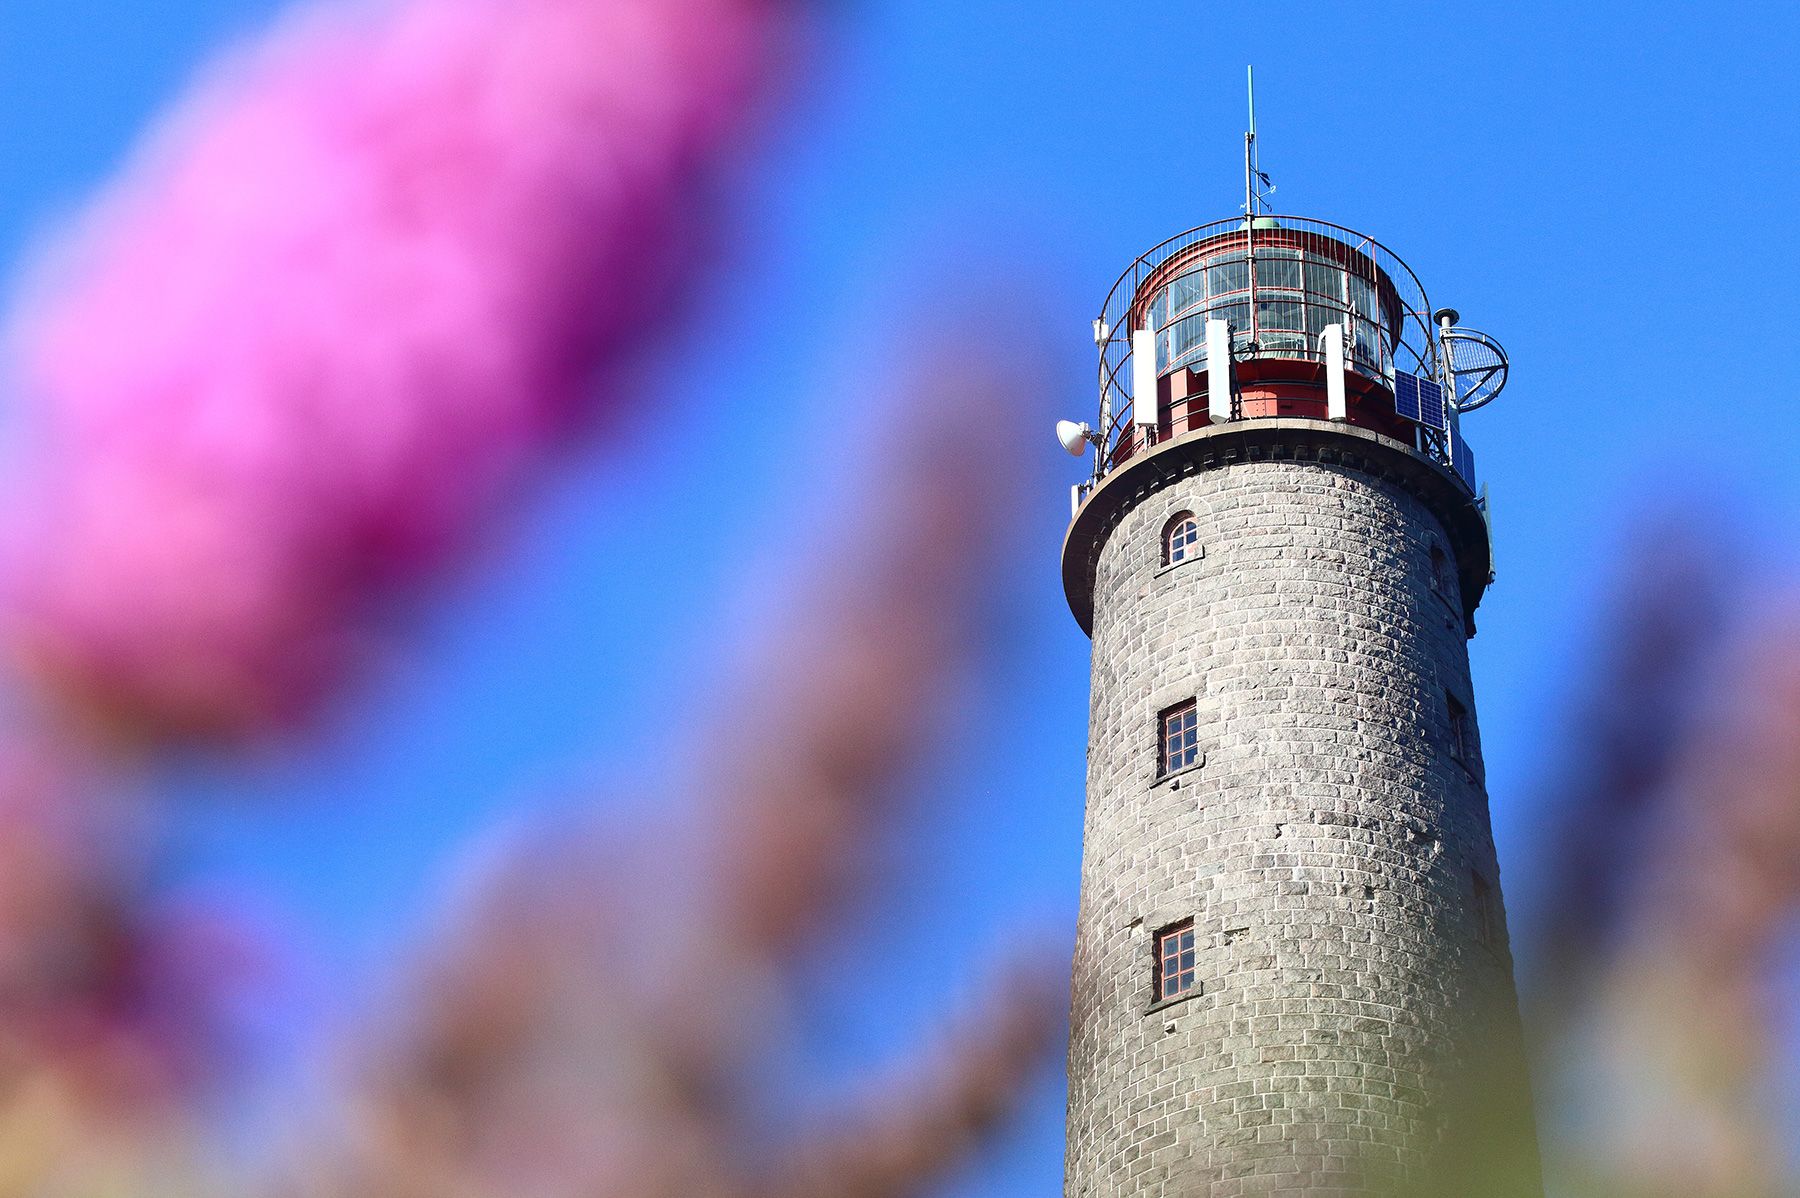 Looking up towards Bengtskär Lighthouse, through pink flowers waving in the breeze.